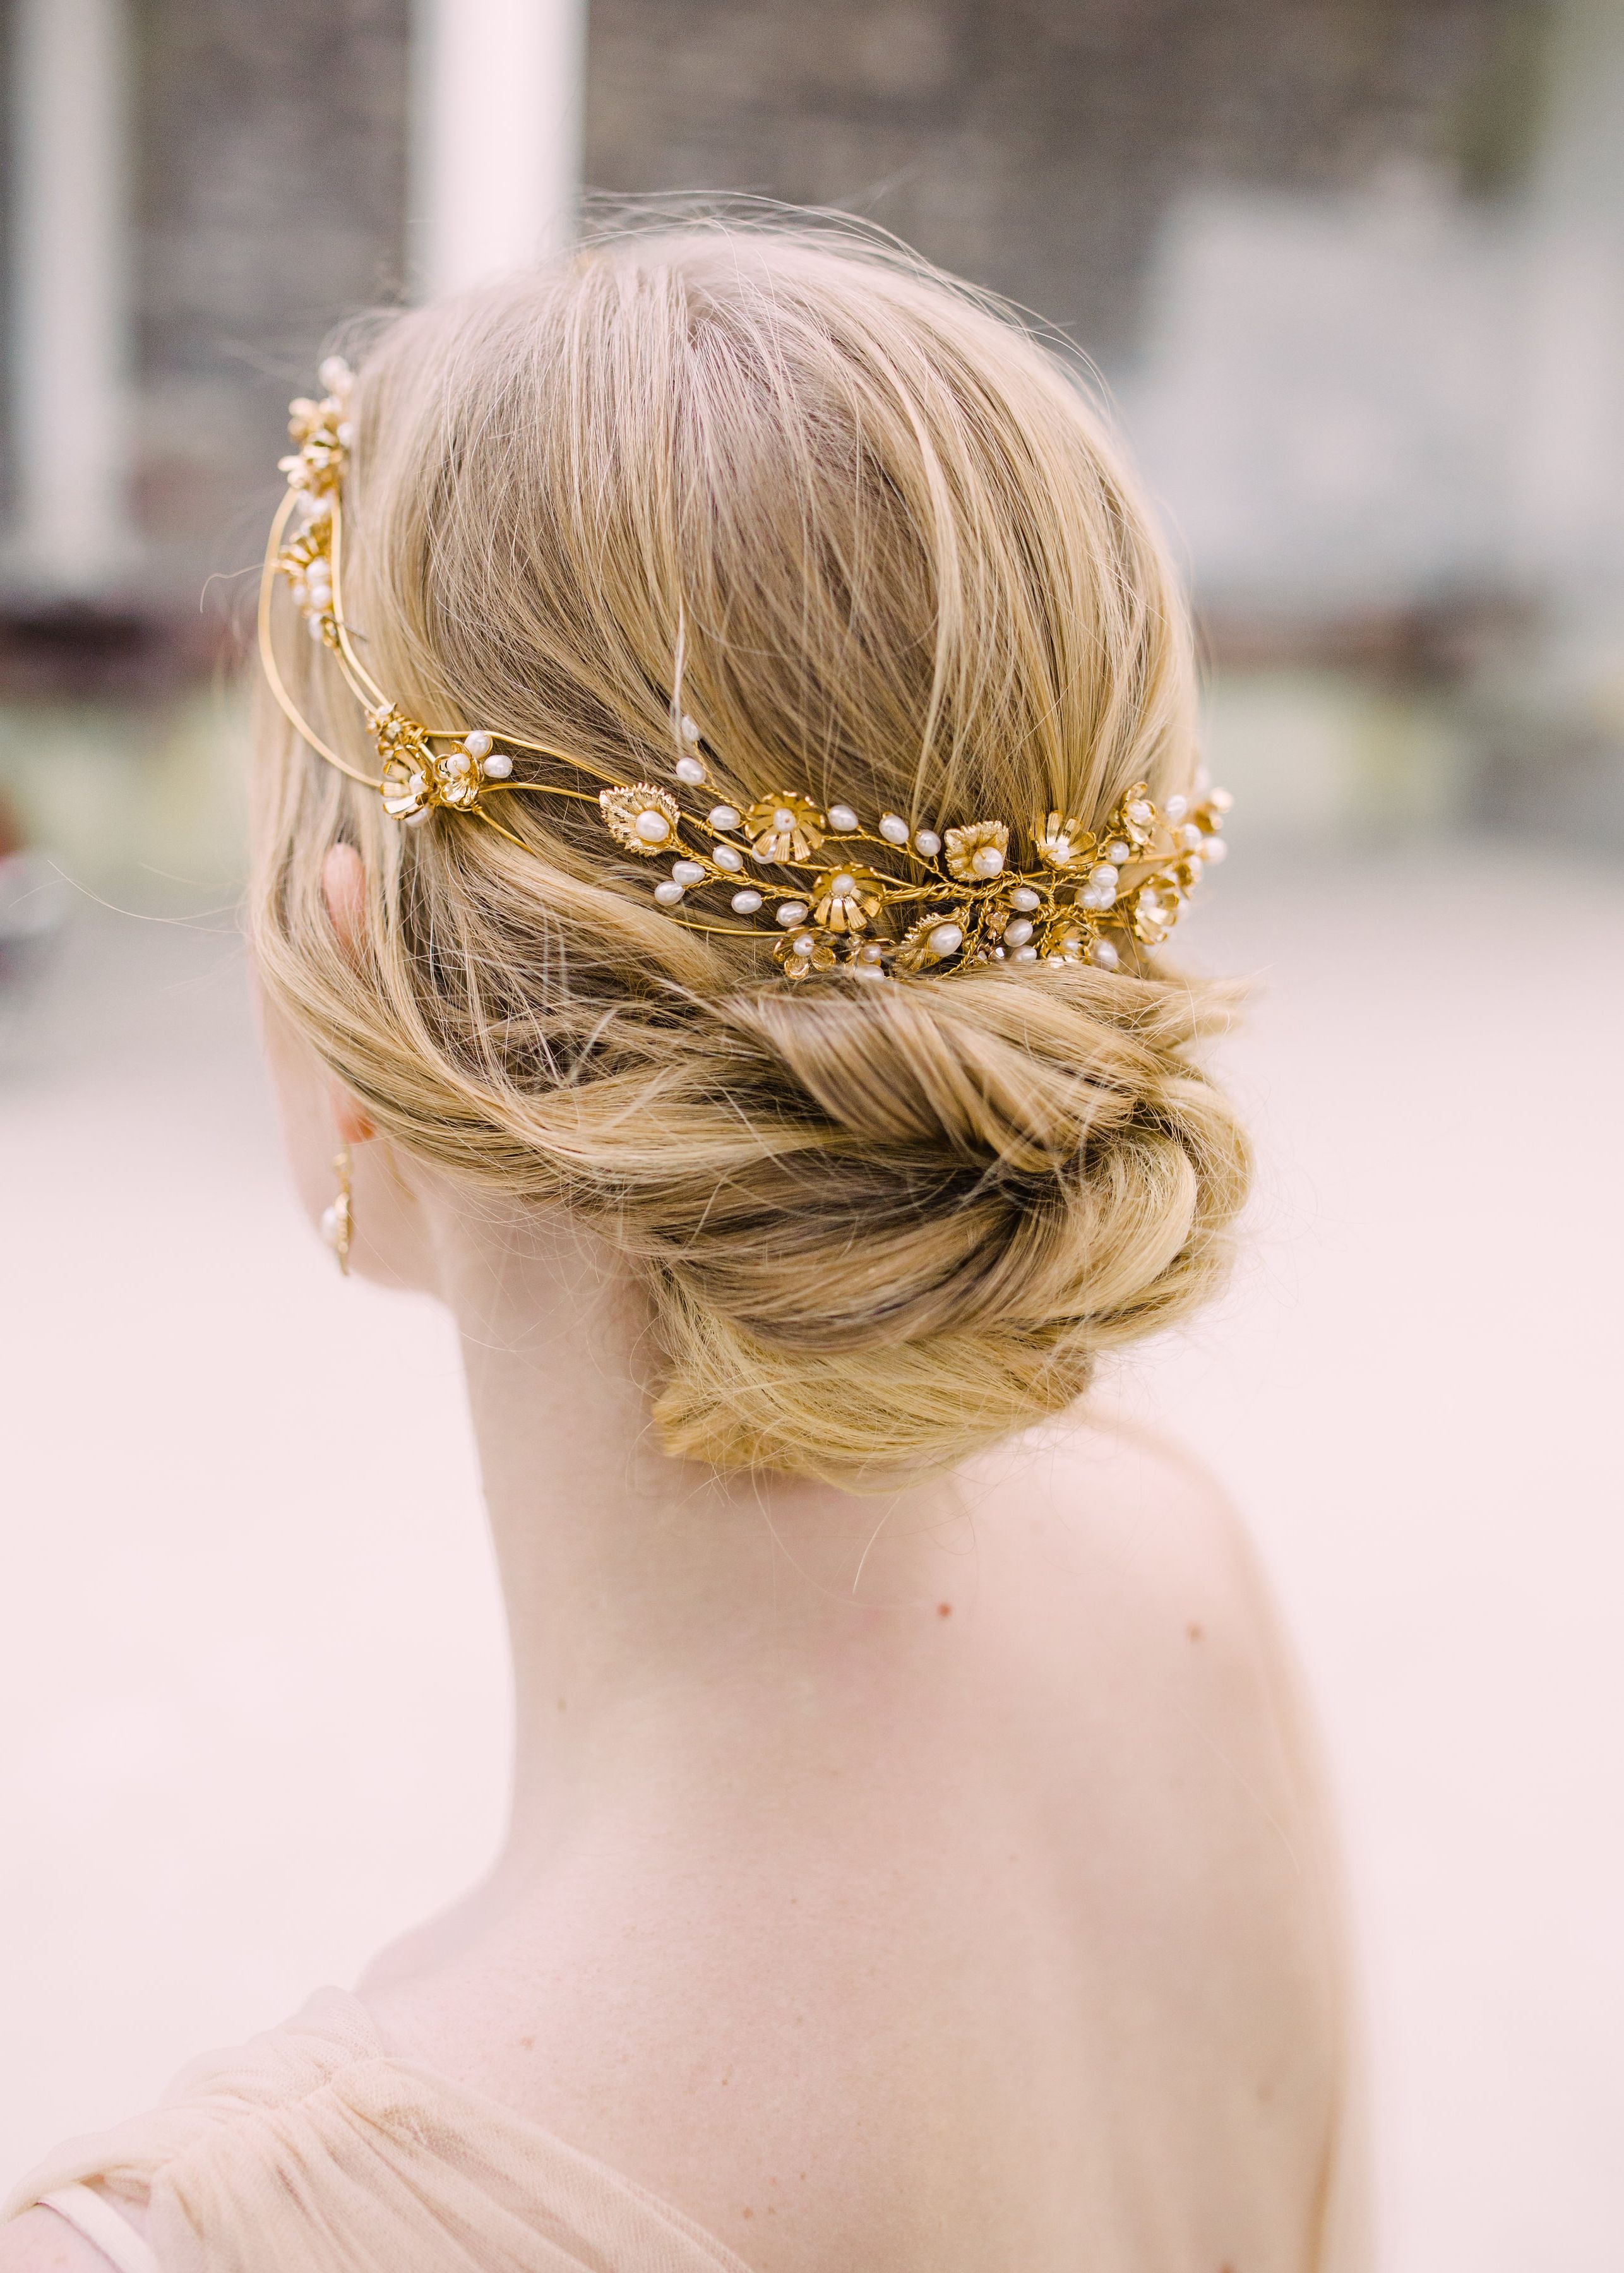 Widely Used Woven Updos With Tendrils For Wedding Within Bridal Hair Accessories: Accessorise Your Wedding Hairstyle – Hair (View 13 of 20)